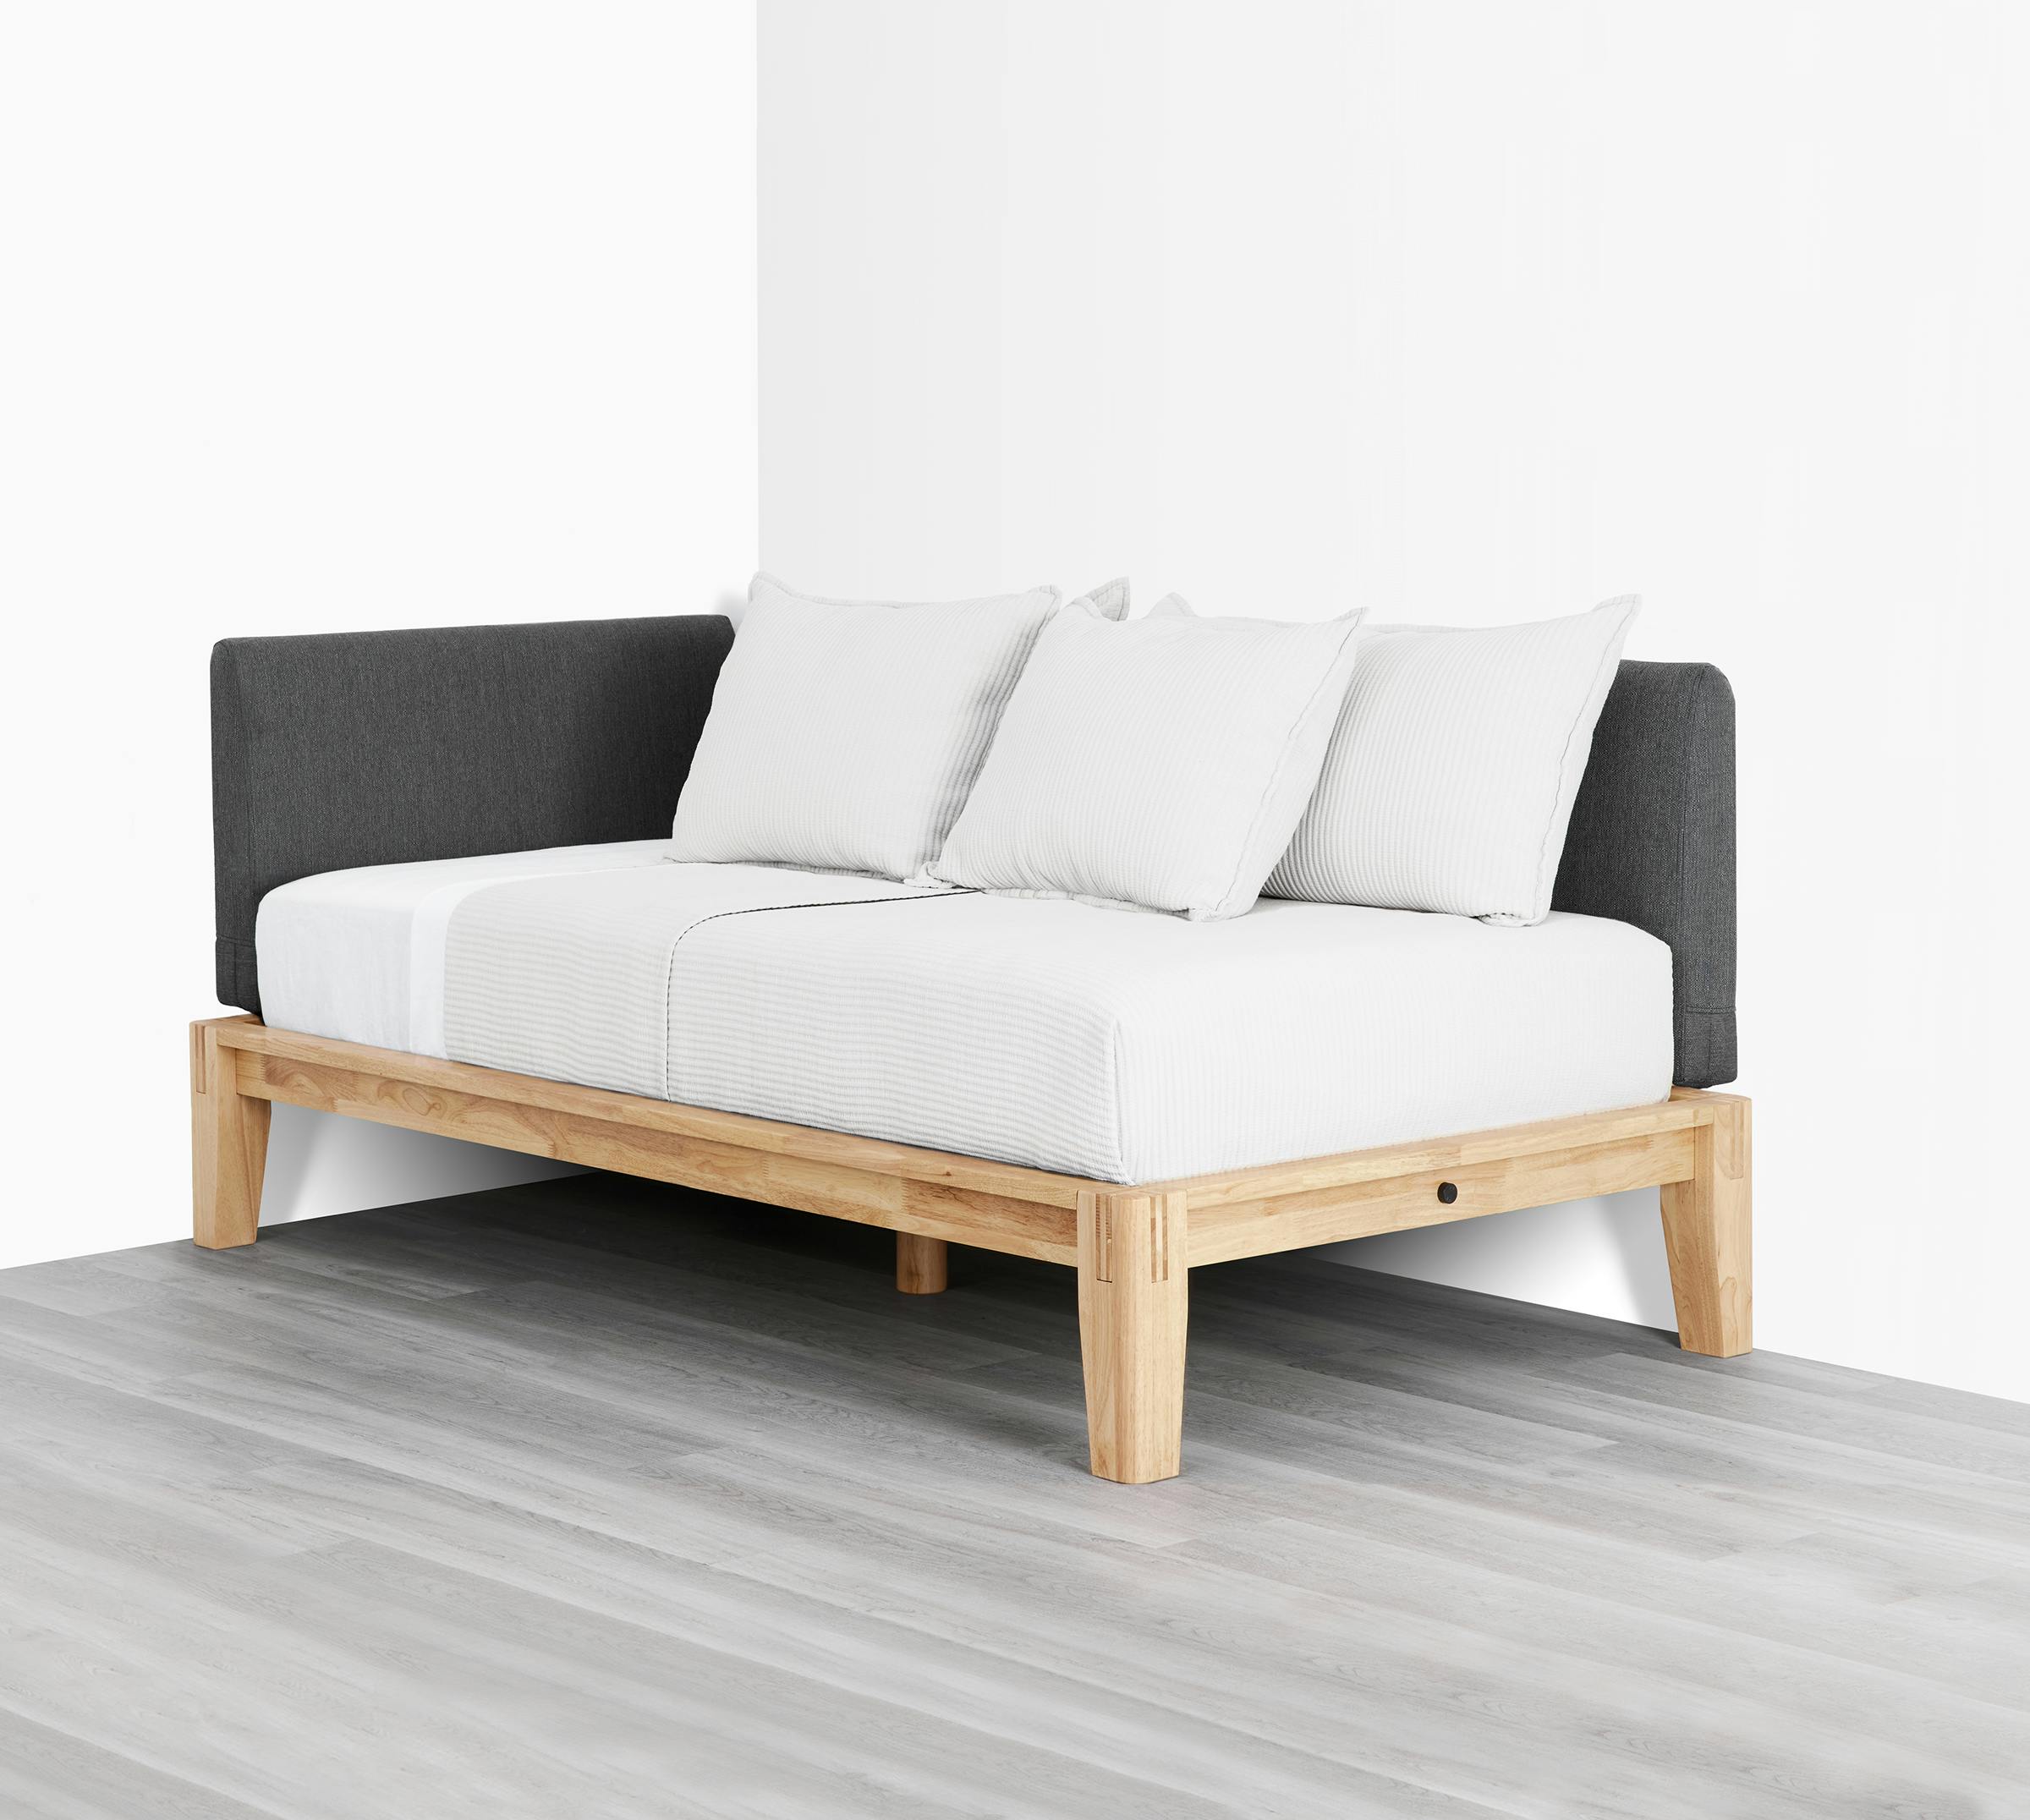 The Bed (Daybed / Natural / Dark Charcoal) - Diagonal 3